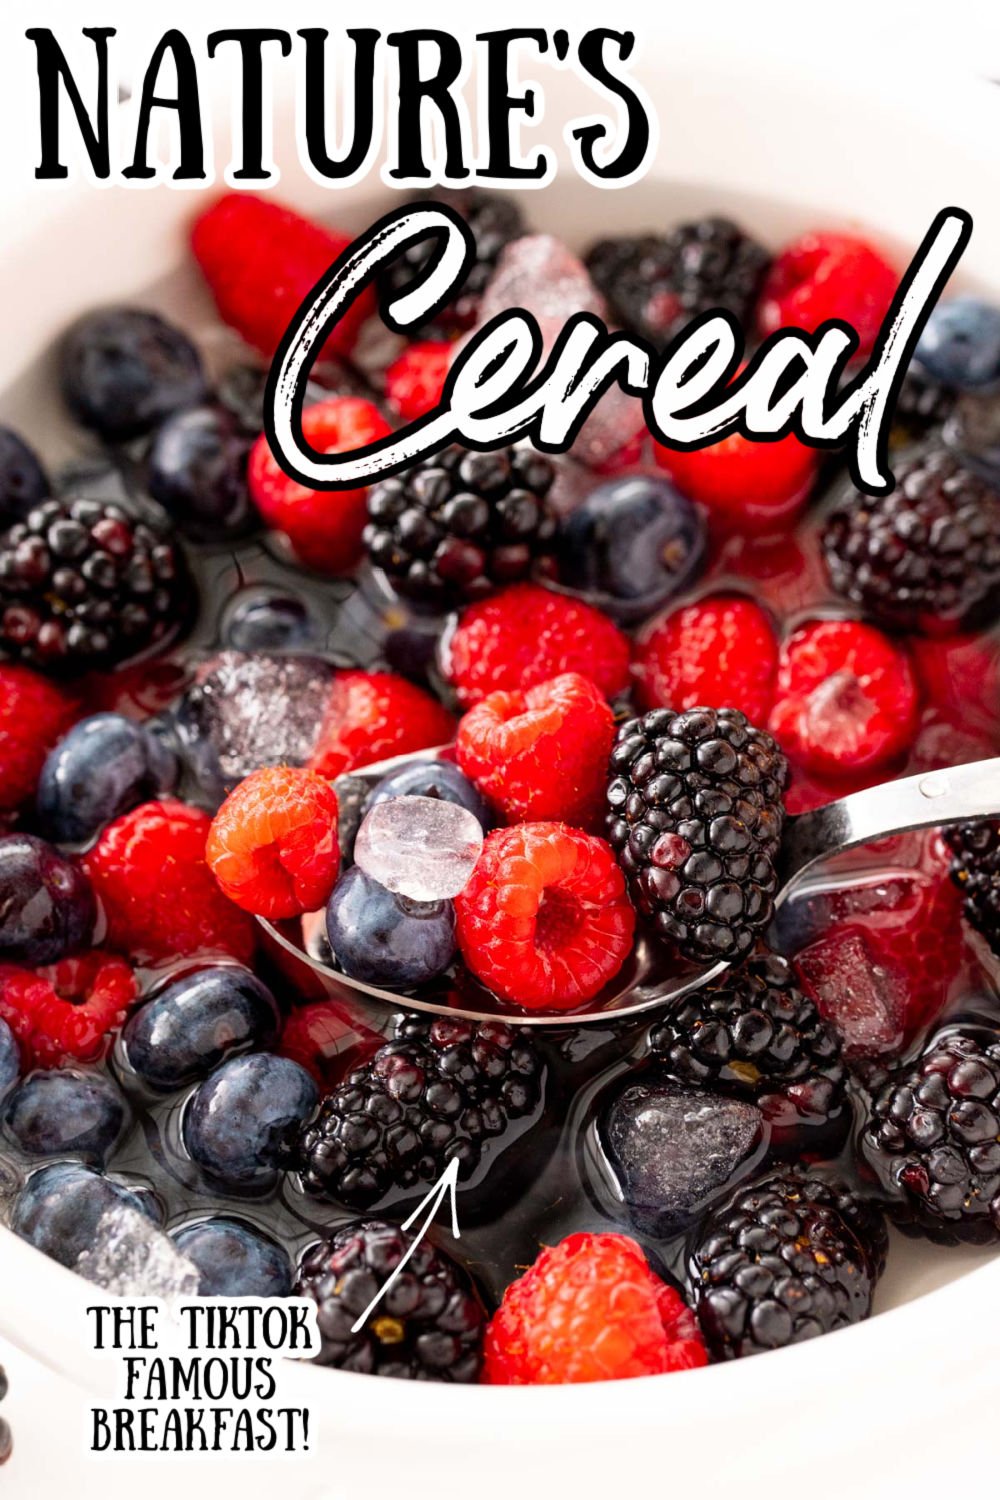 Nature's Cereal is the hottest new (and healthy) TikTok trend that's taking the world by storm! Made with fresh berries, coconut water, and ice - it's super refreshing and flavorful! via @sugarandsoulco